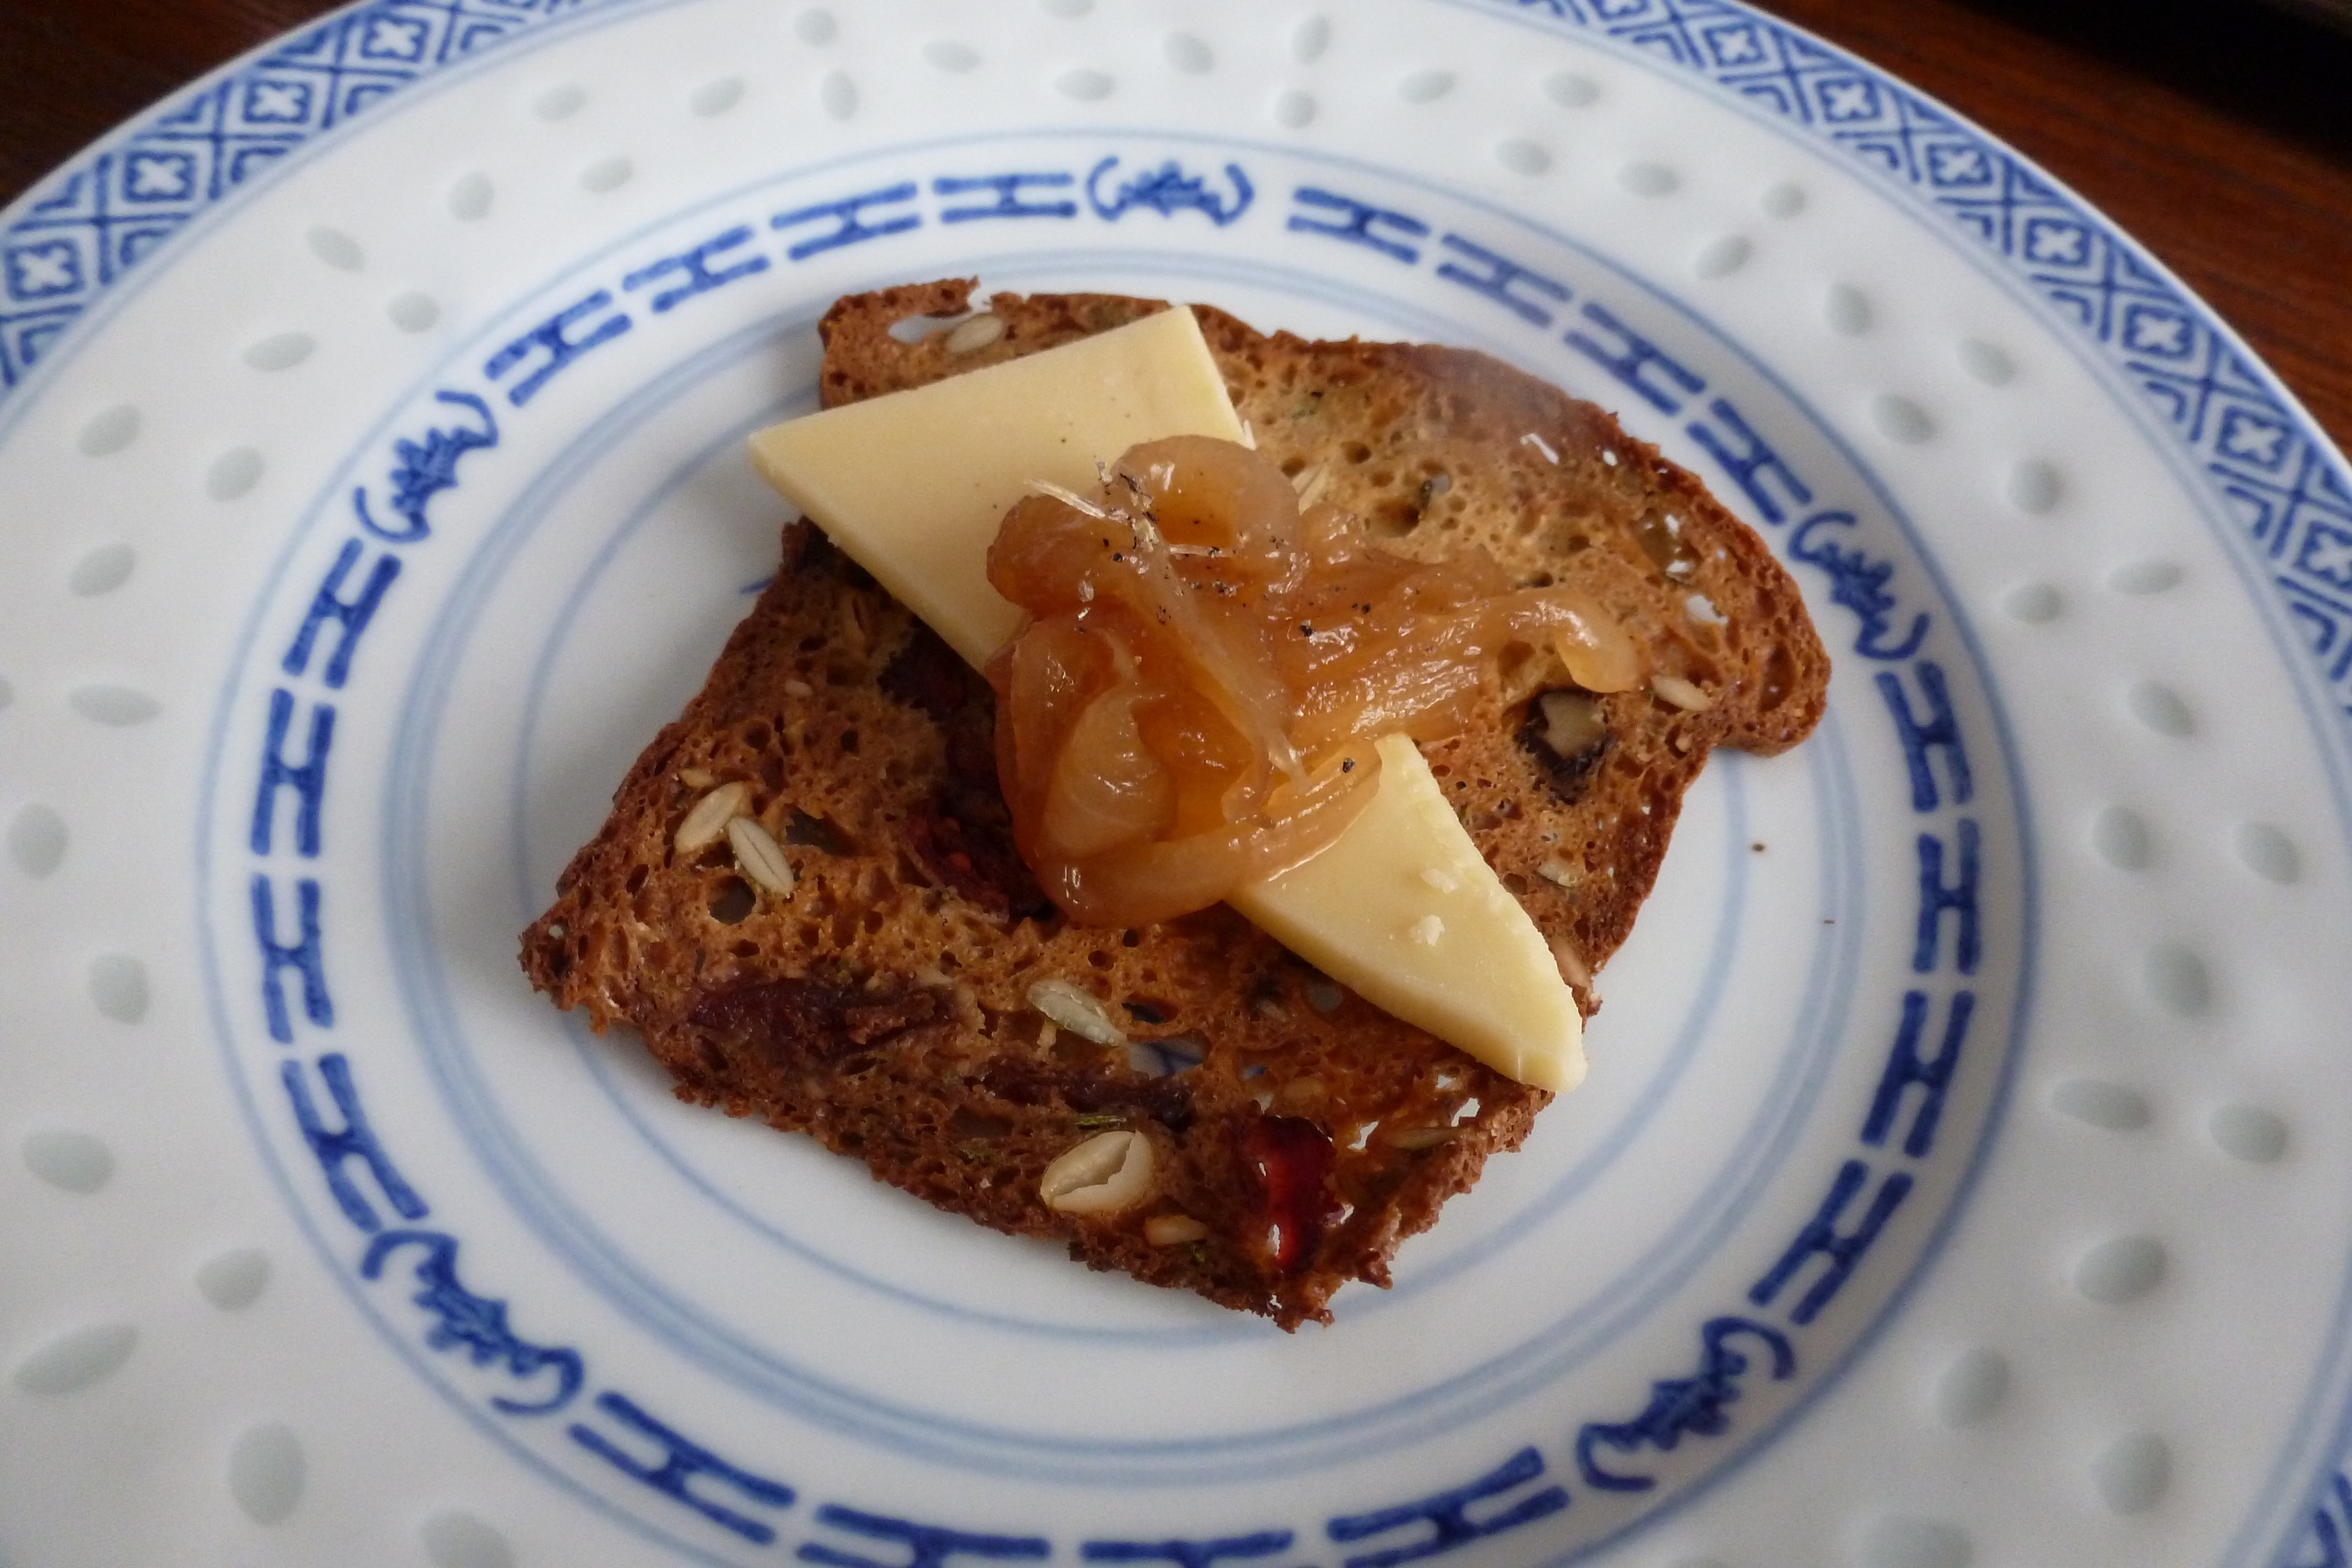 "Cheese and Crackers": Sylvan Star gouda, dried fruit and nut cracker, and onion jam